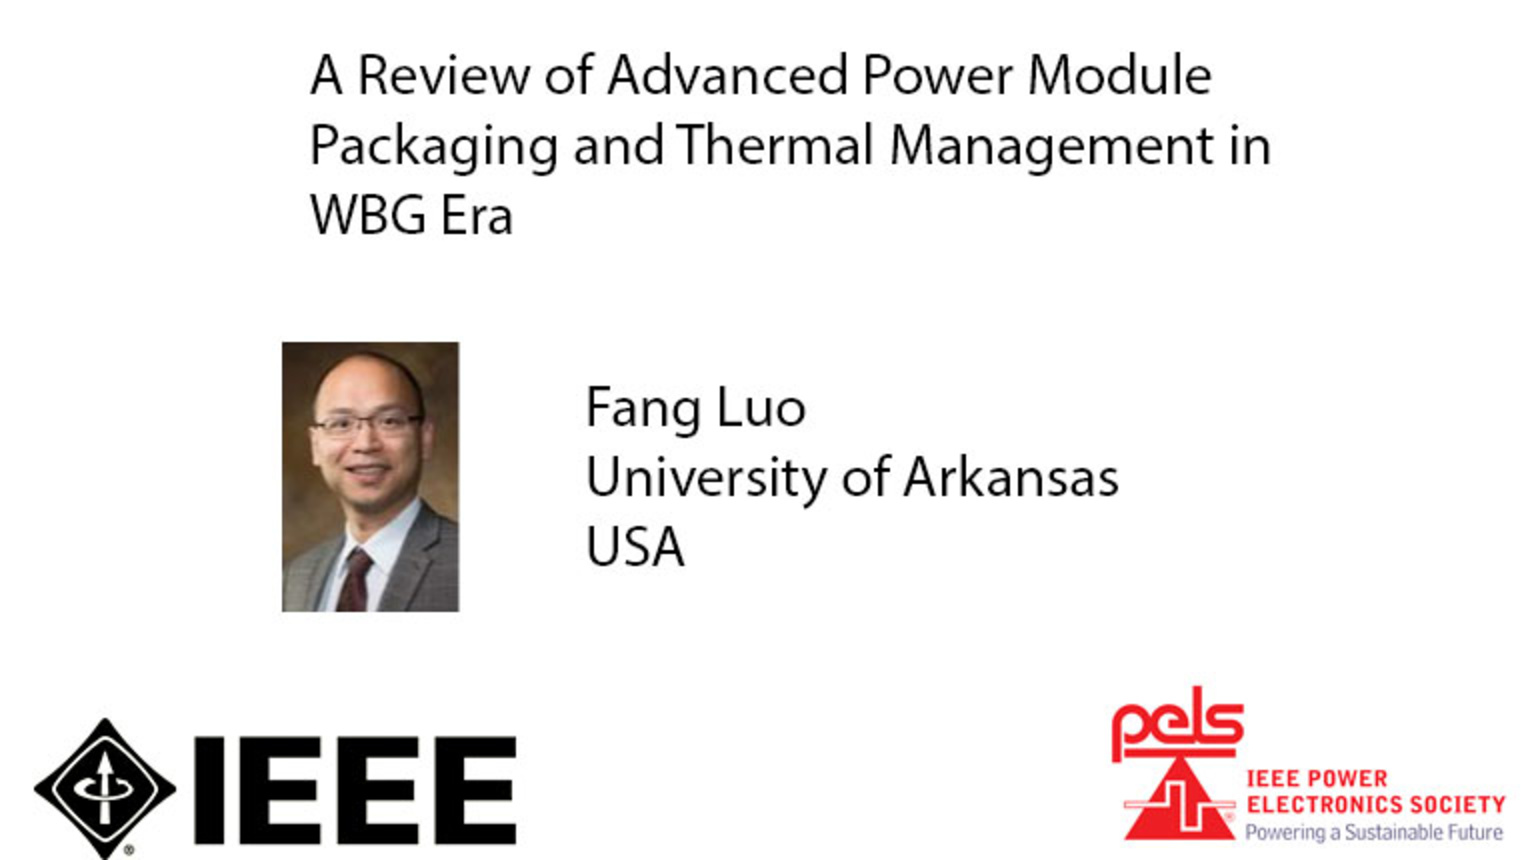 A Review of Advanced Power Module Packaging and Thermal Management in WBG Era